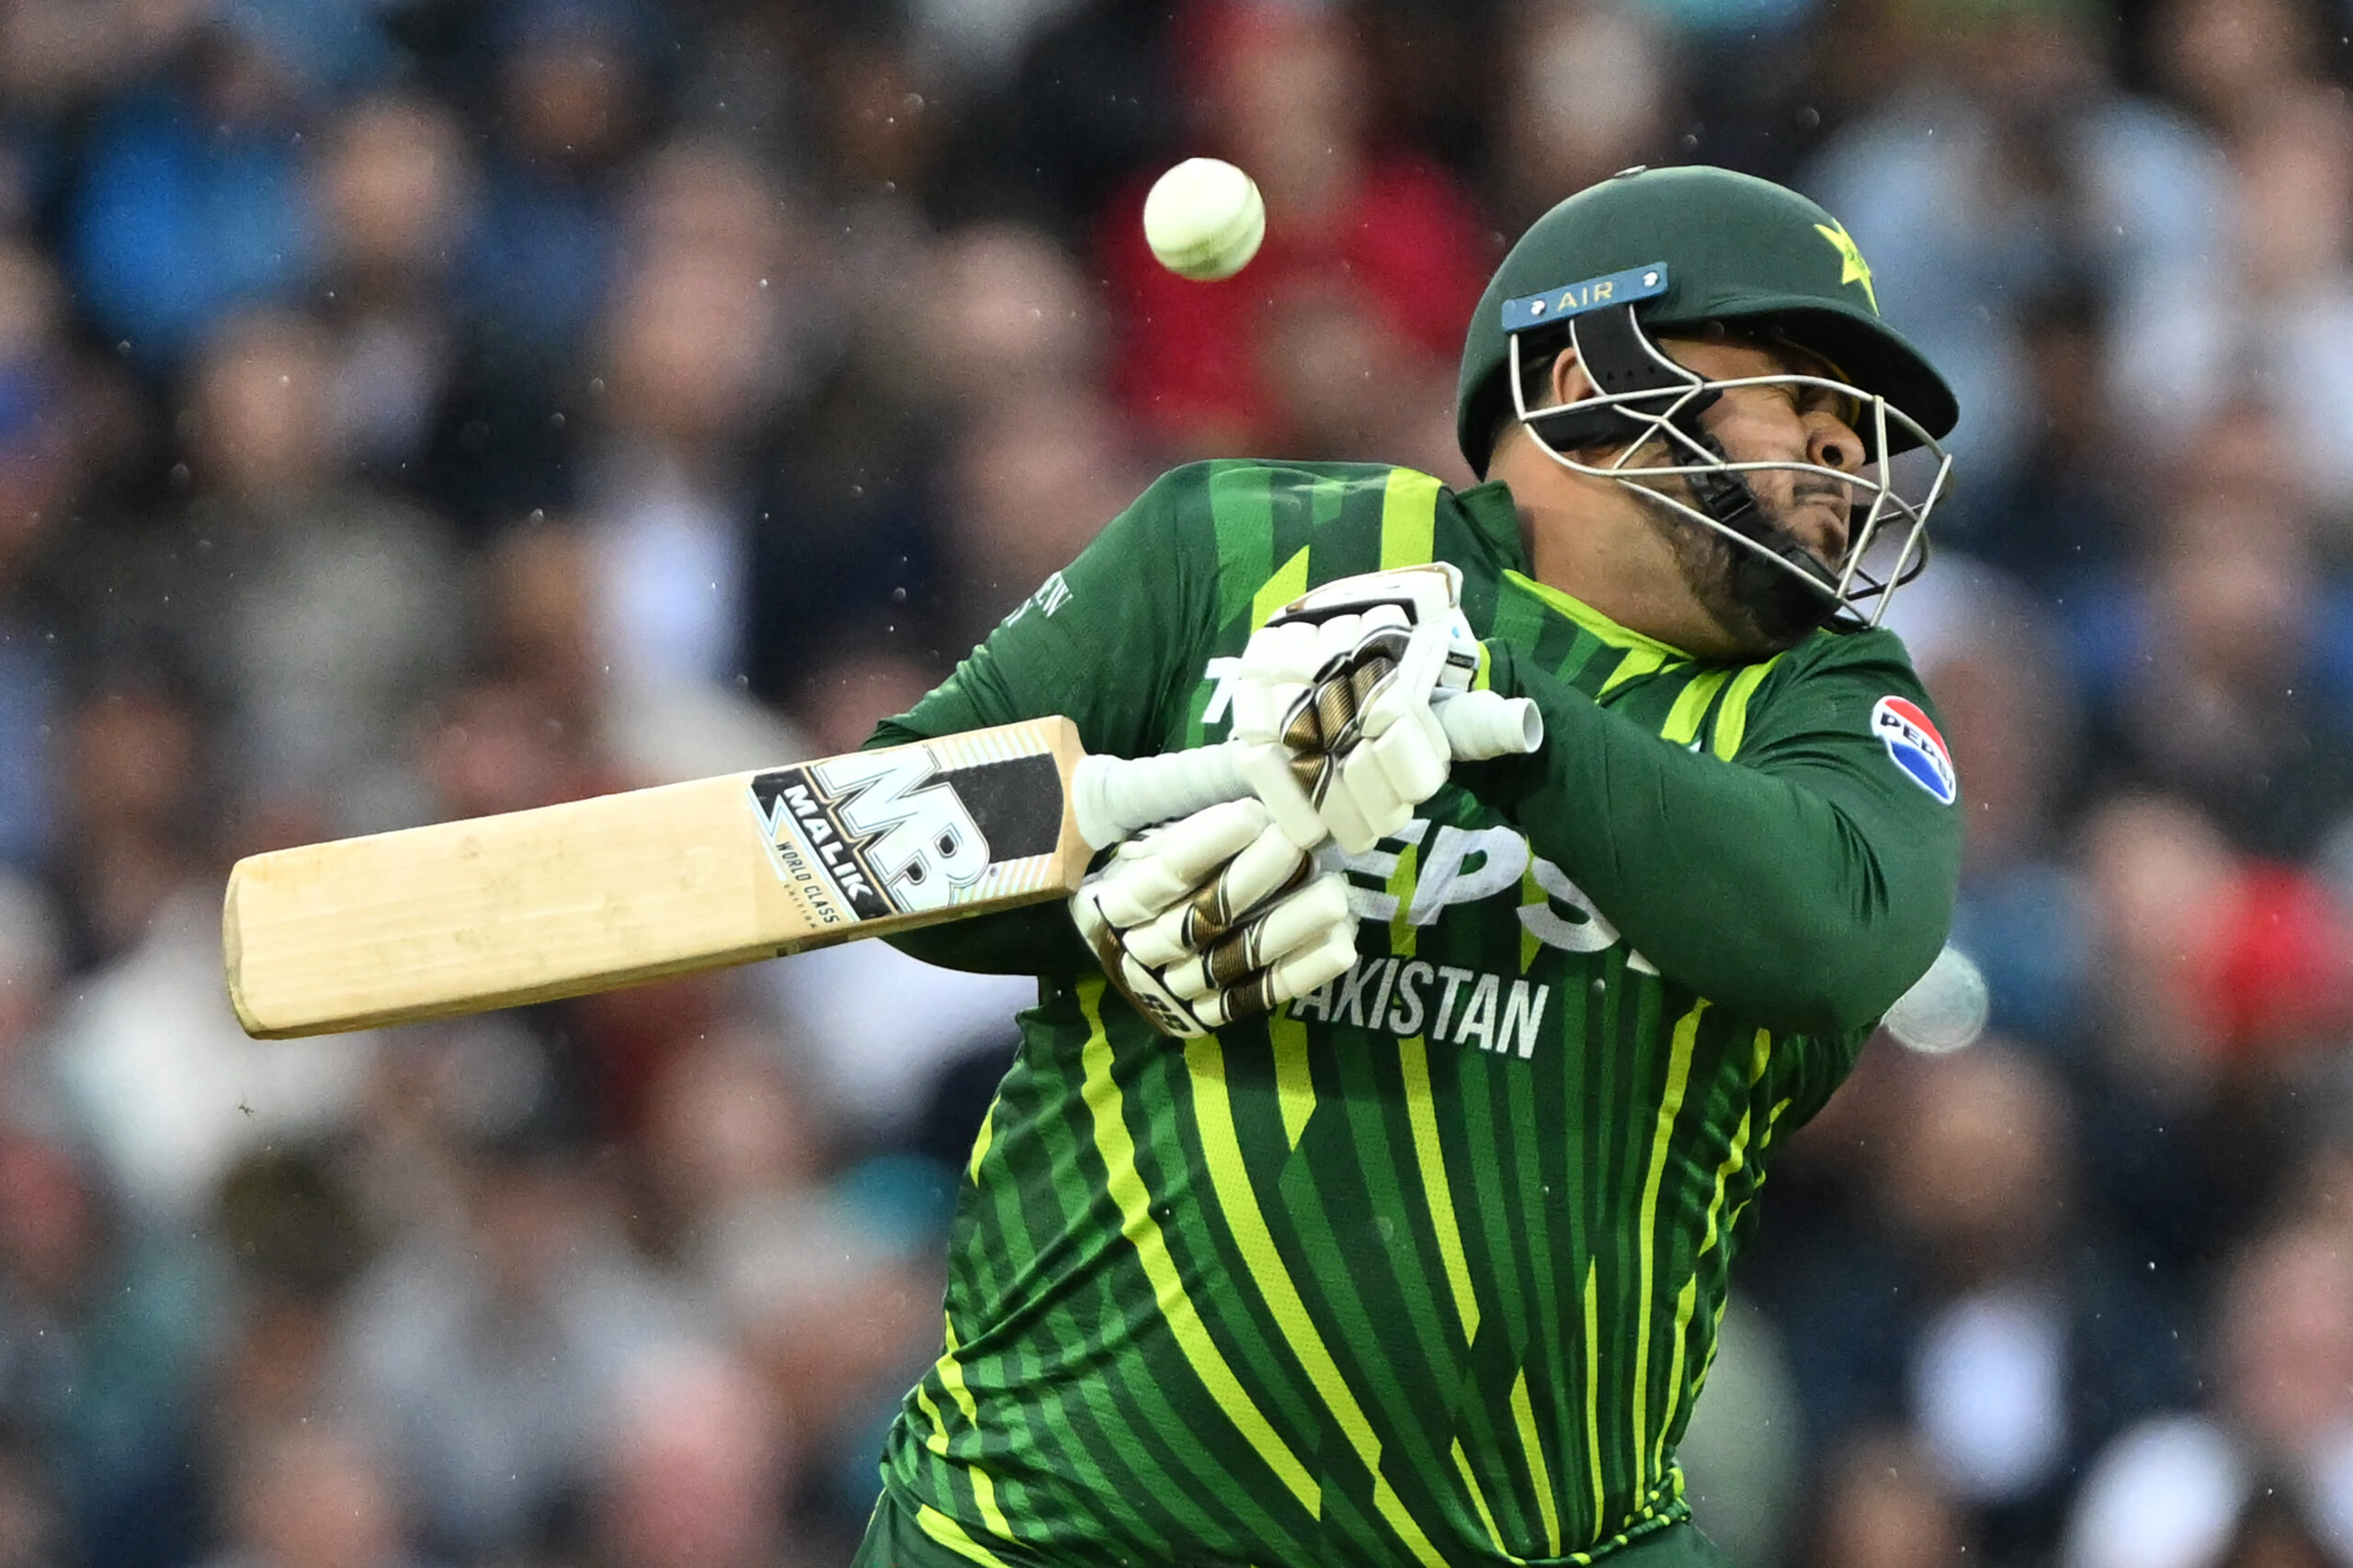 “Best Example Of Nepotism”: Pakistan’s Young Star Criticised for Lacklustre Performance